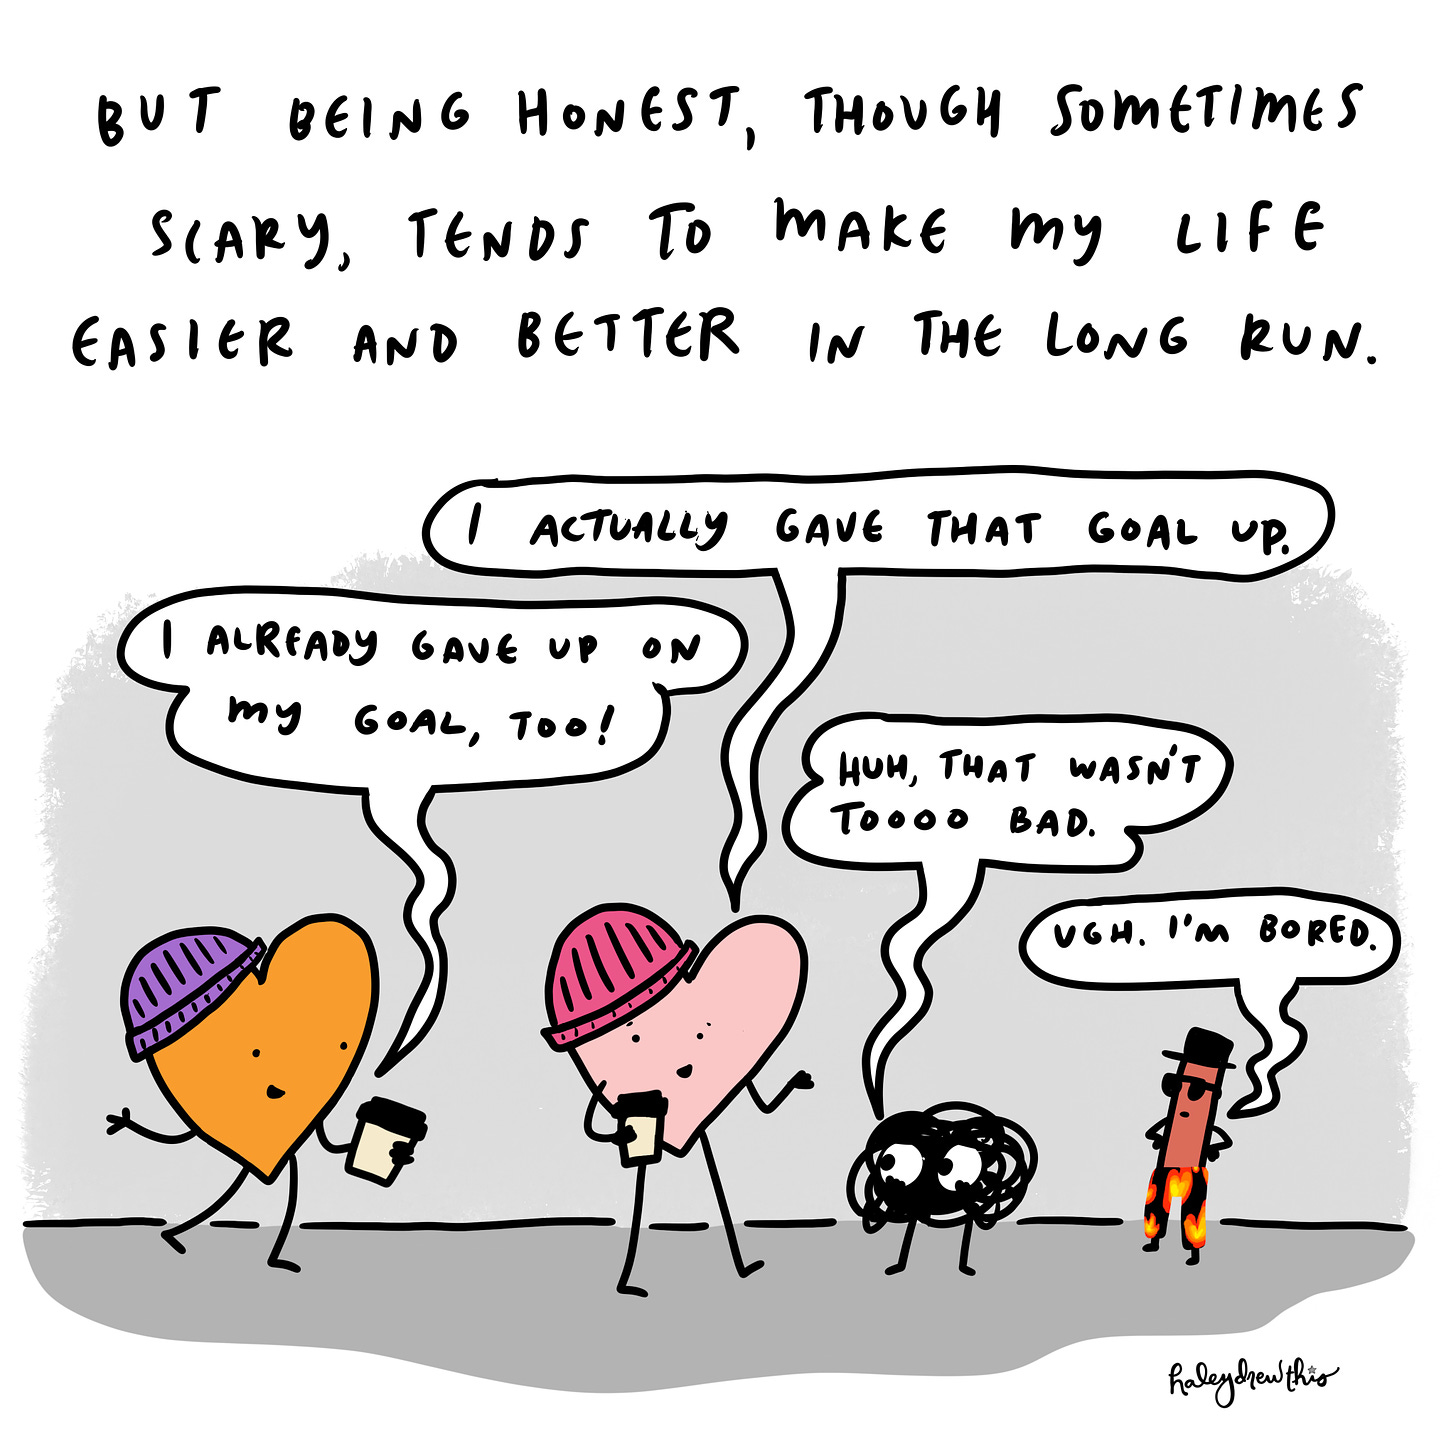 But being honest tends to make my life a lot easier.  Me: I think I’ve learned I like my bed too much for that goal. Friend: oh yeah, me too.  Anxiety: Huh, that wasn’t too bad. The Liar: Whatever. Ooh, let’s go tell those people we’ve run a half marathon! 